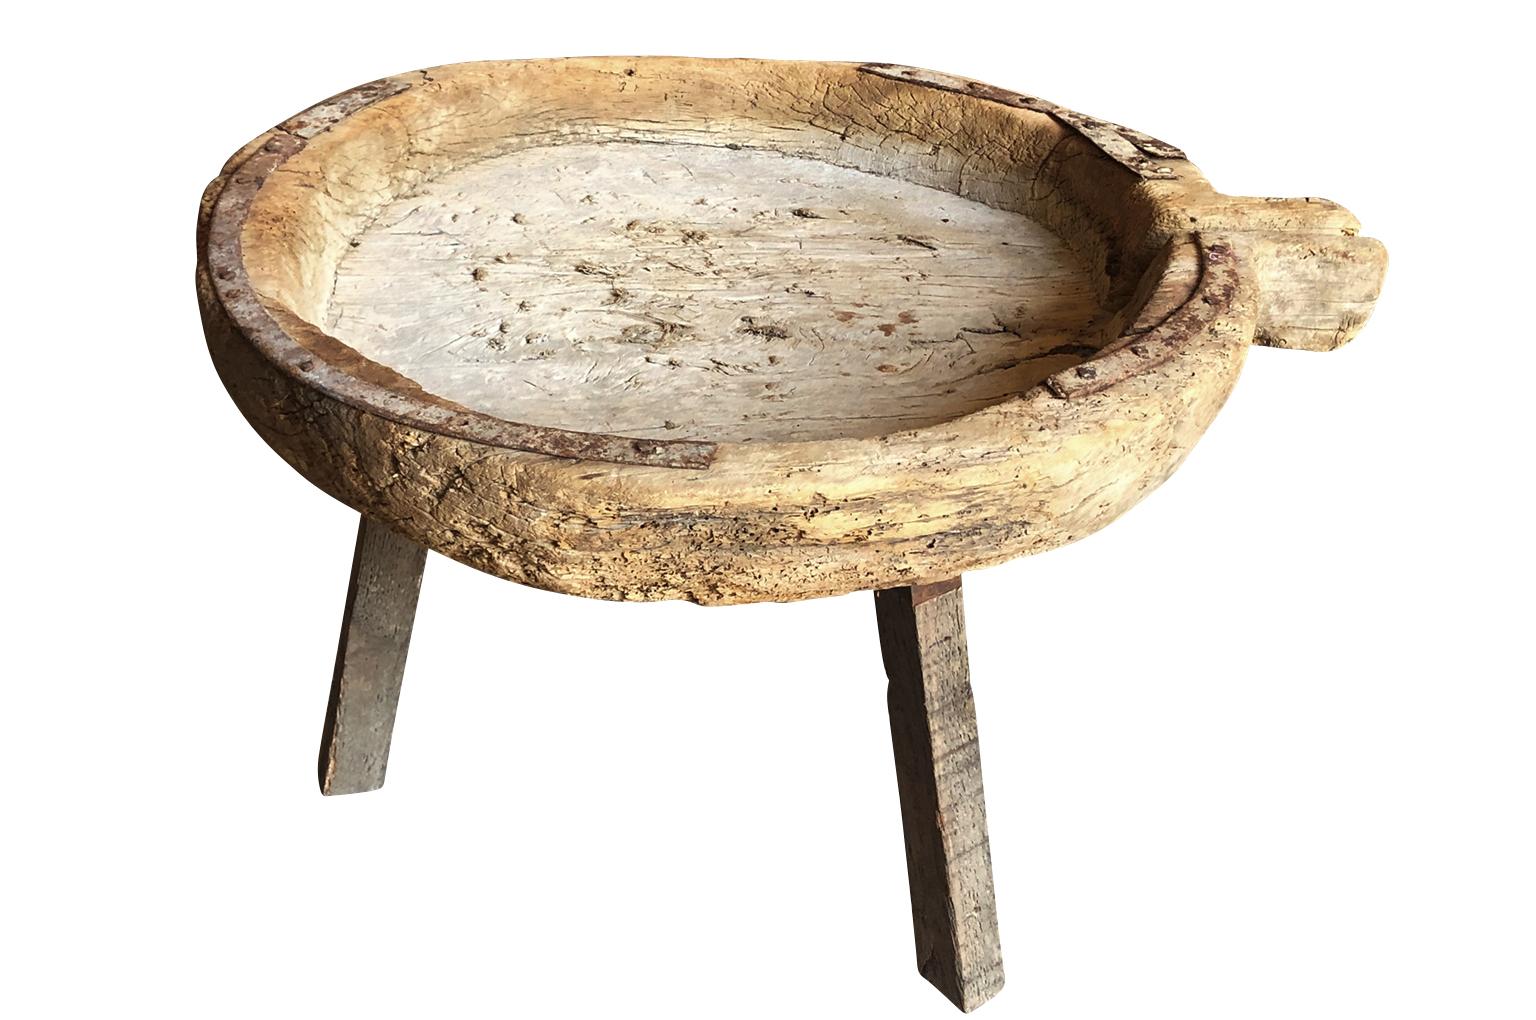 A wonderful and primitive 17th century cheese making table from the Catalan region of Spain. Terrific patina. Wonderful as a cocktail or coffee table.